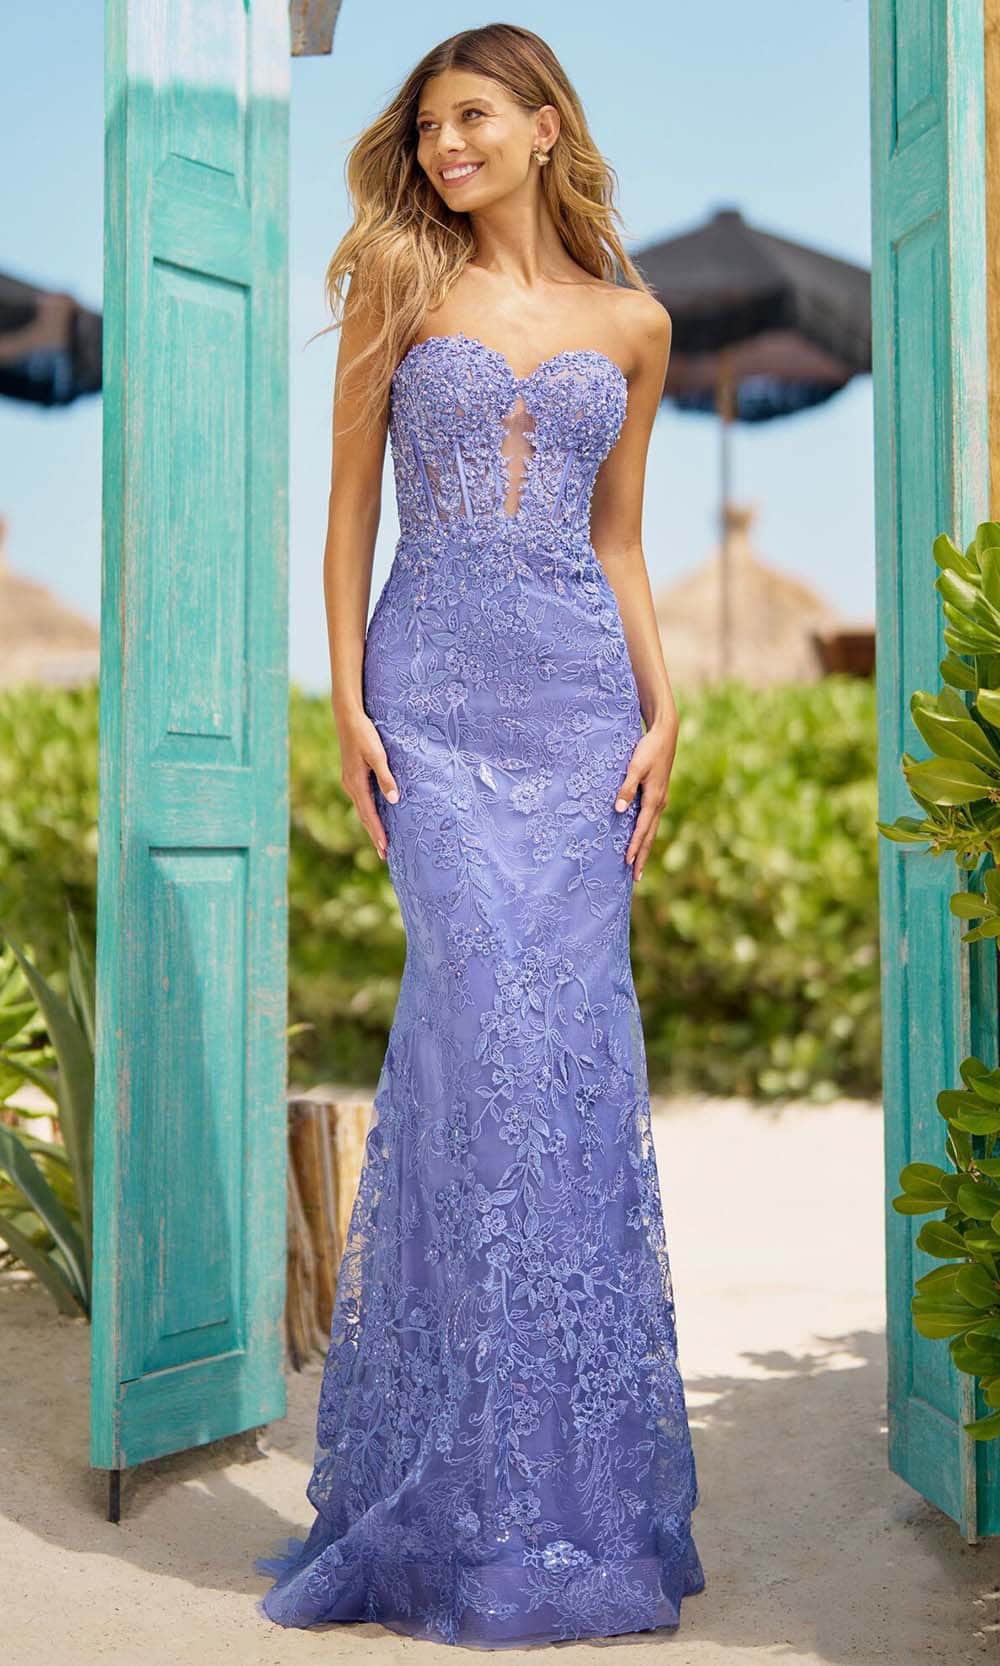 Image of Sherri Hill 56160 - Floral Strapless Prom Dress